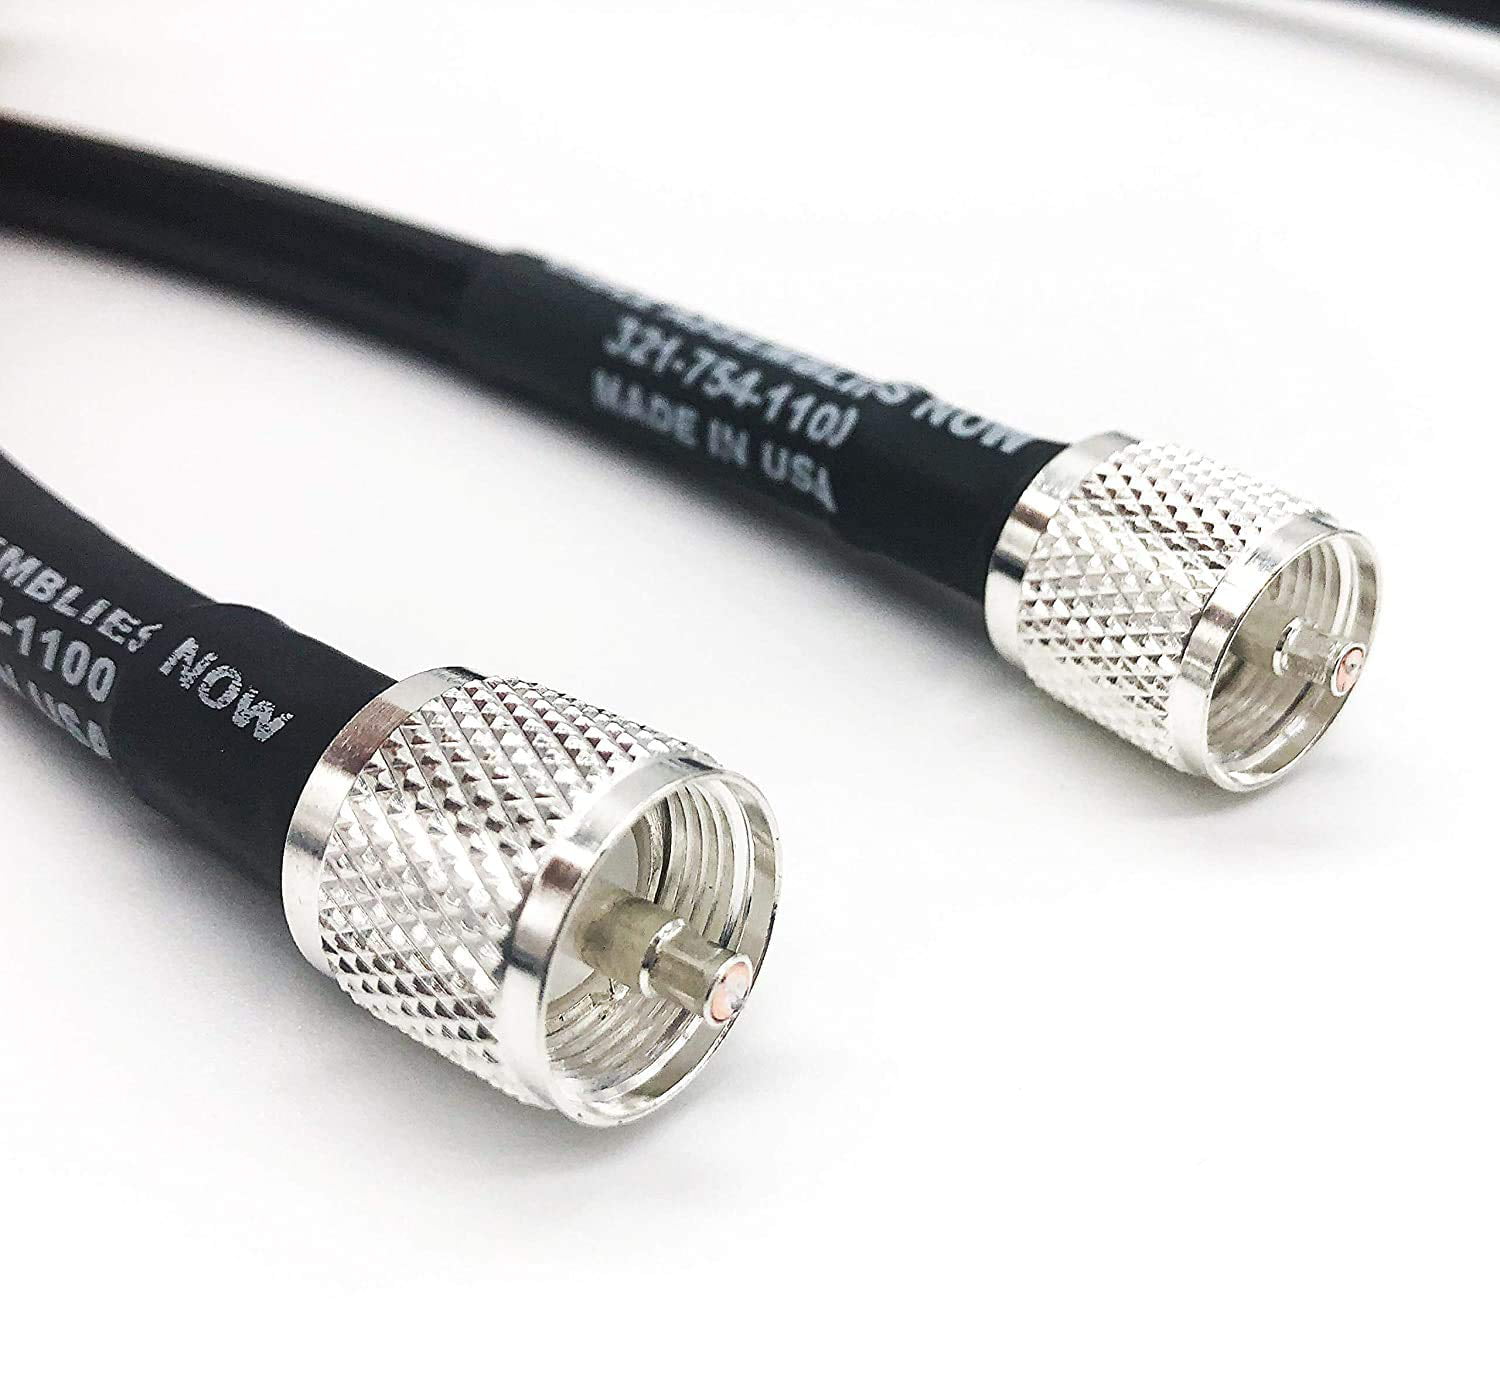 TIMES® 40 FEET LMR-400 Times Microwave Coax Cable N Male Connector LMR400 USA 